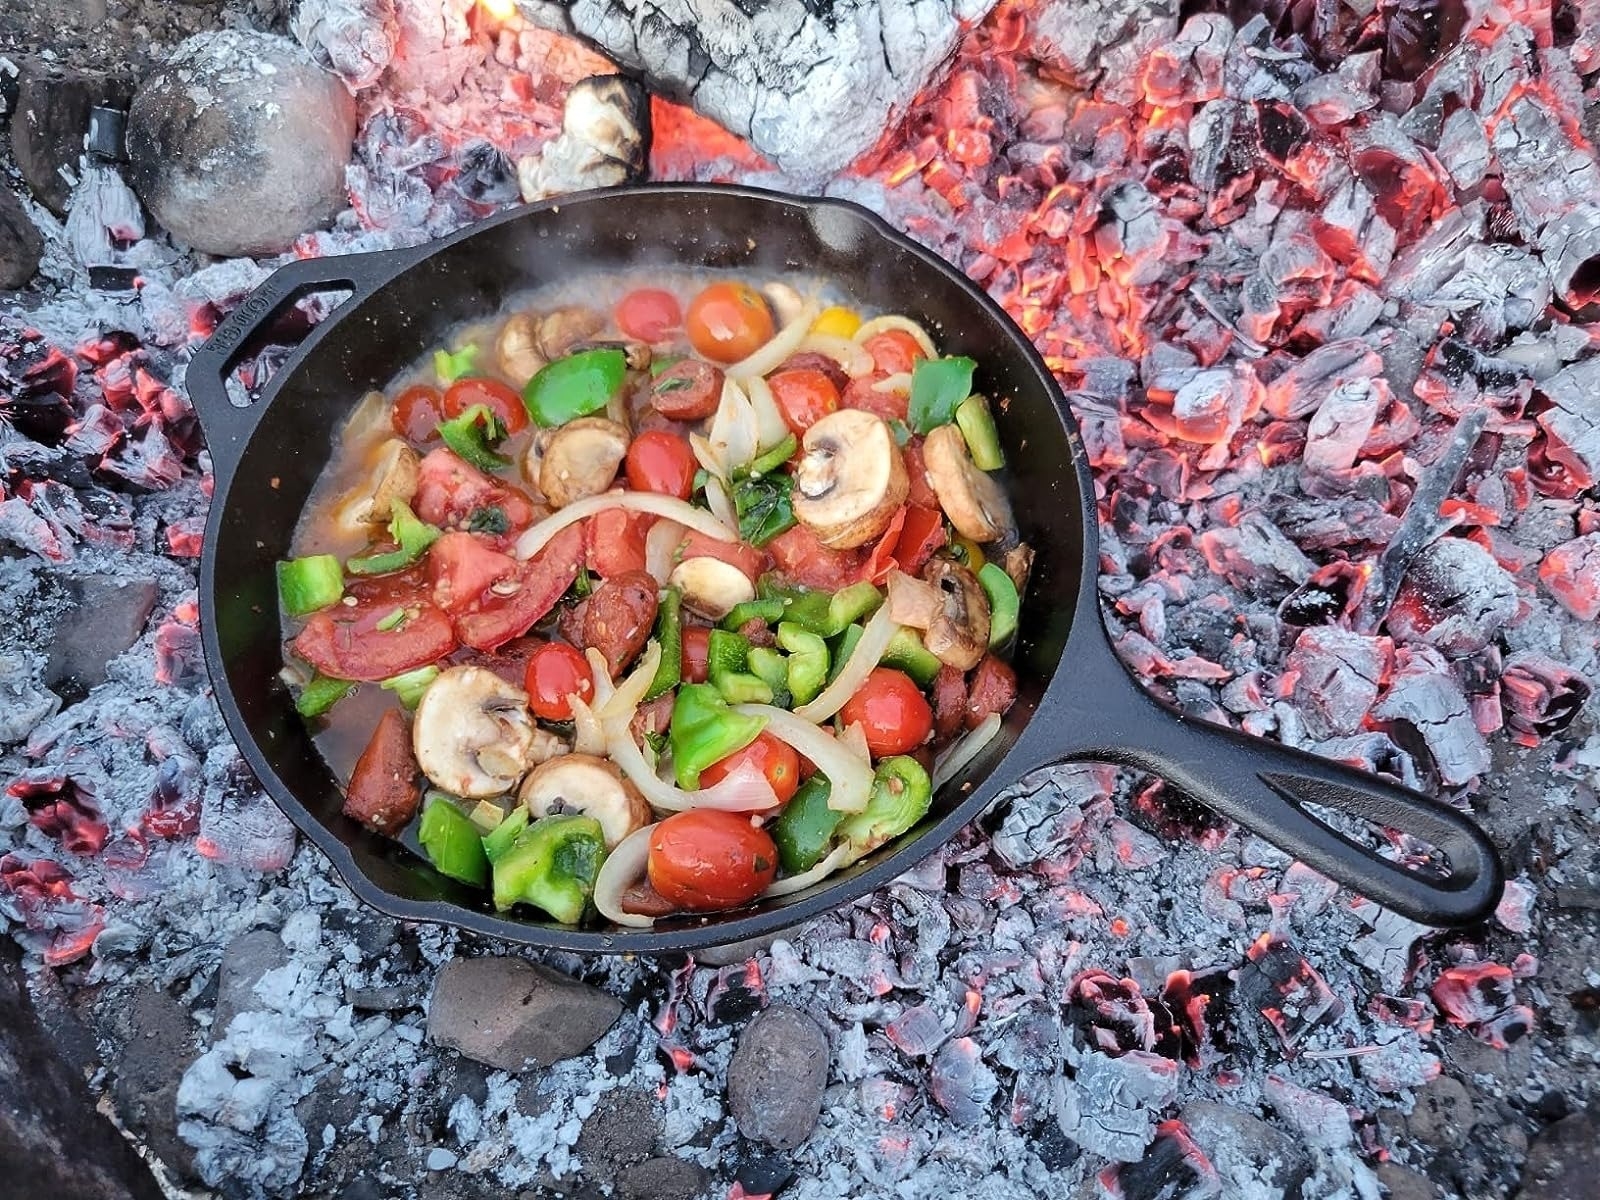 Cast iron skillet with mixed vegetables cooking over a bed of hot coals